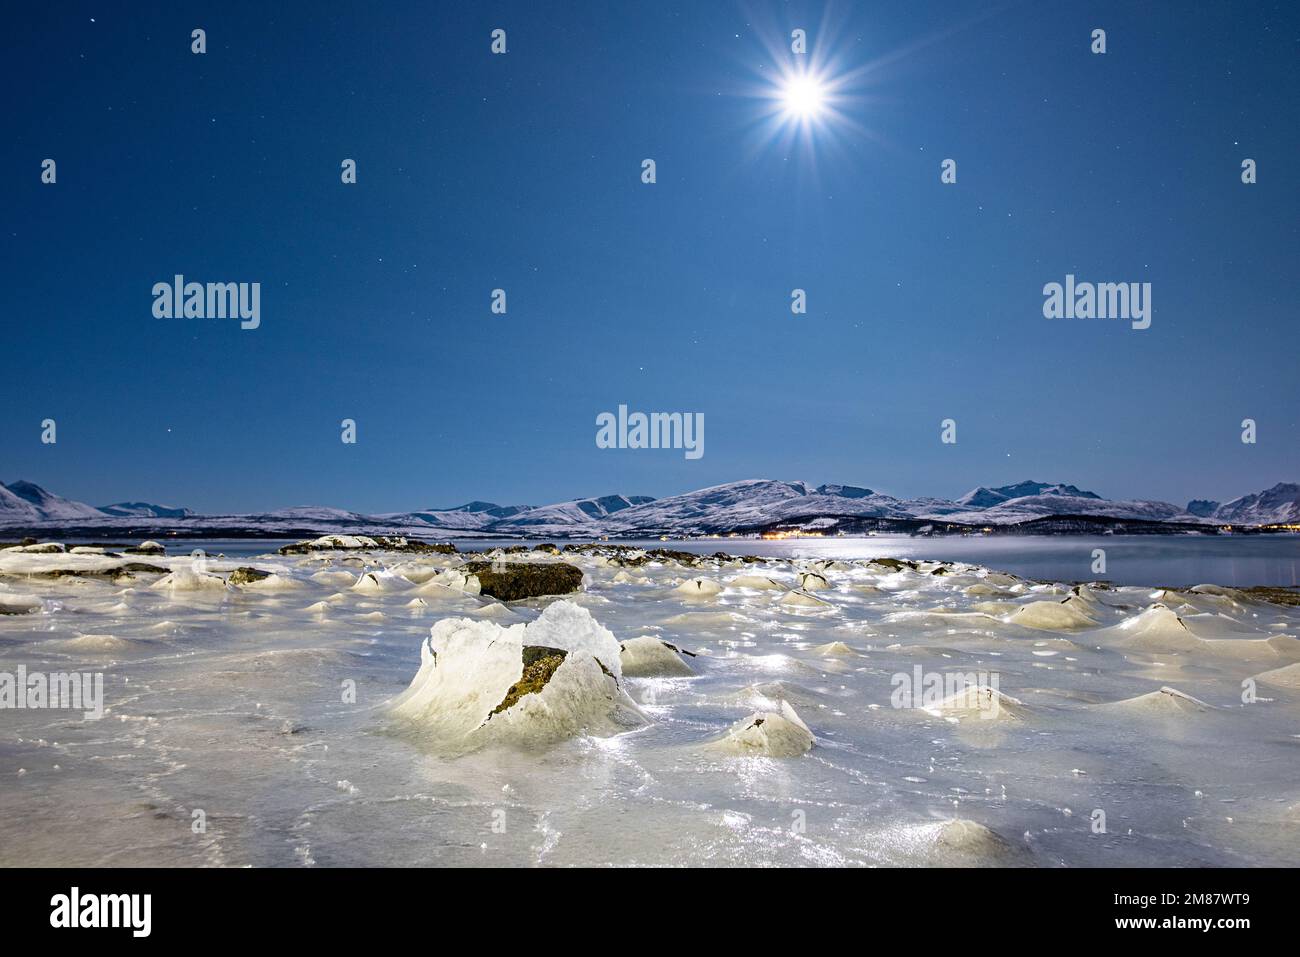 Frozen salt water under full moon, night in the Arctic in freezing conditions, extreme cold Stock Photo